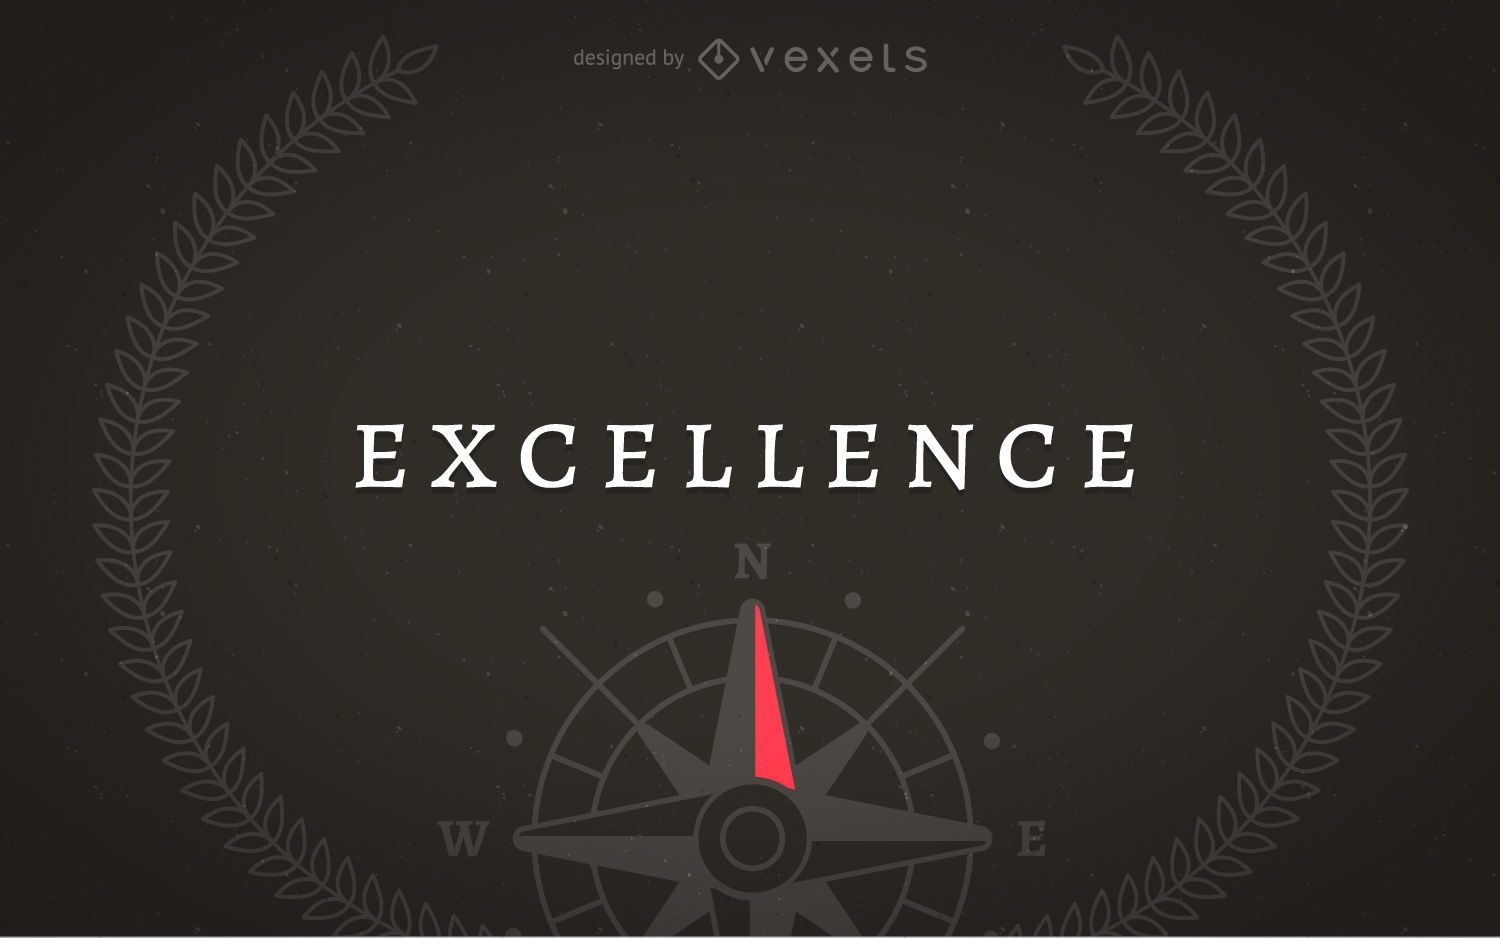 Excellence concept illustration